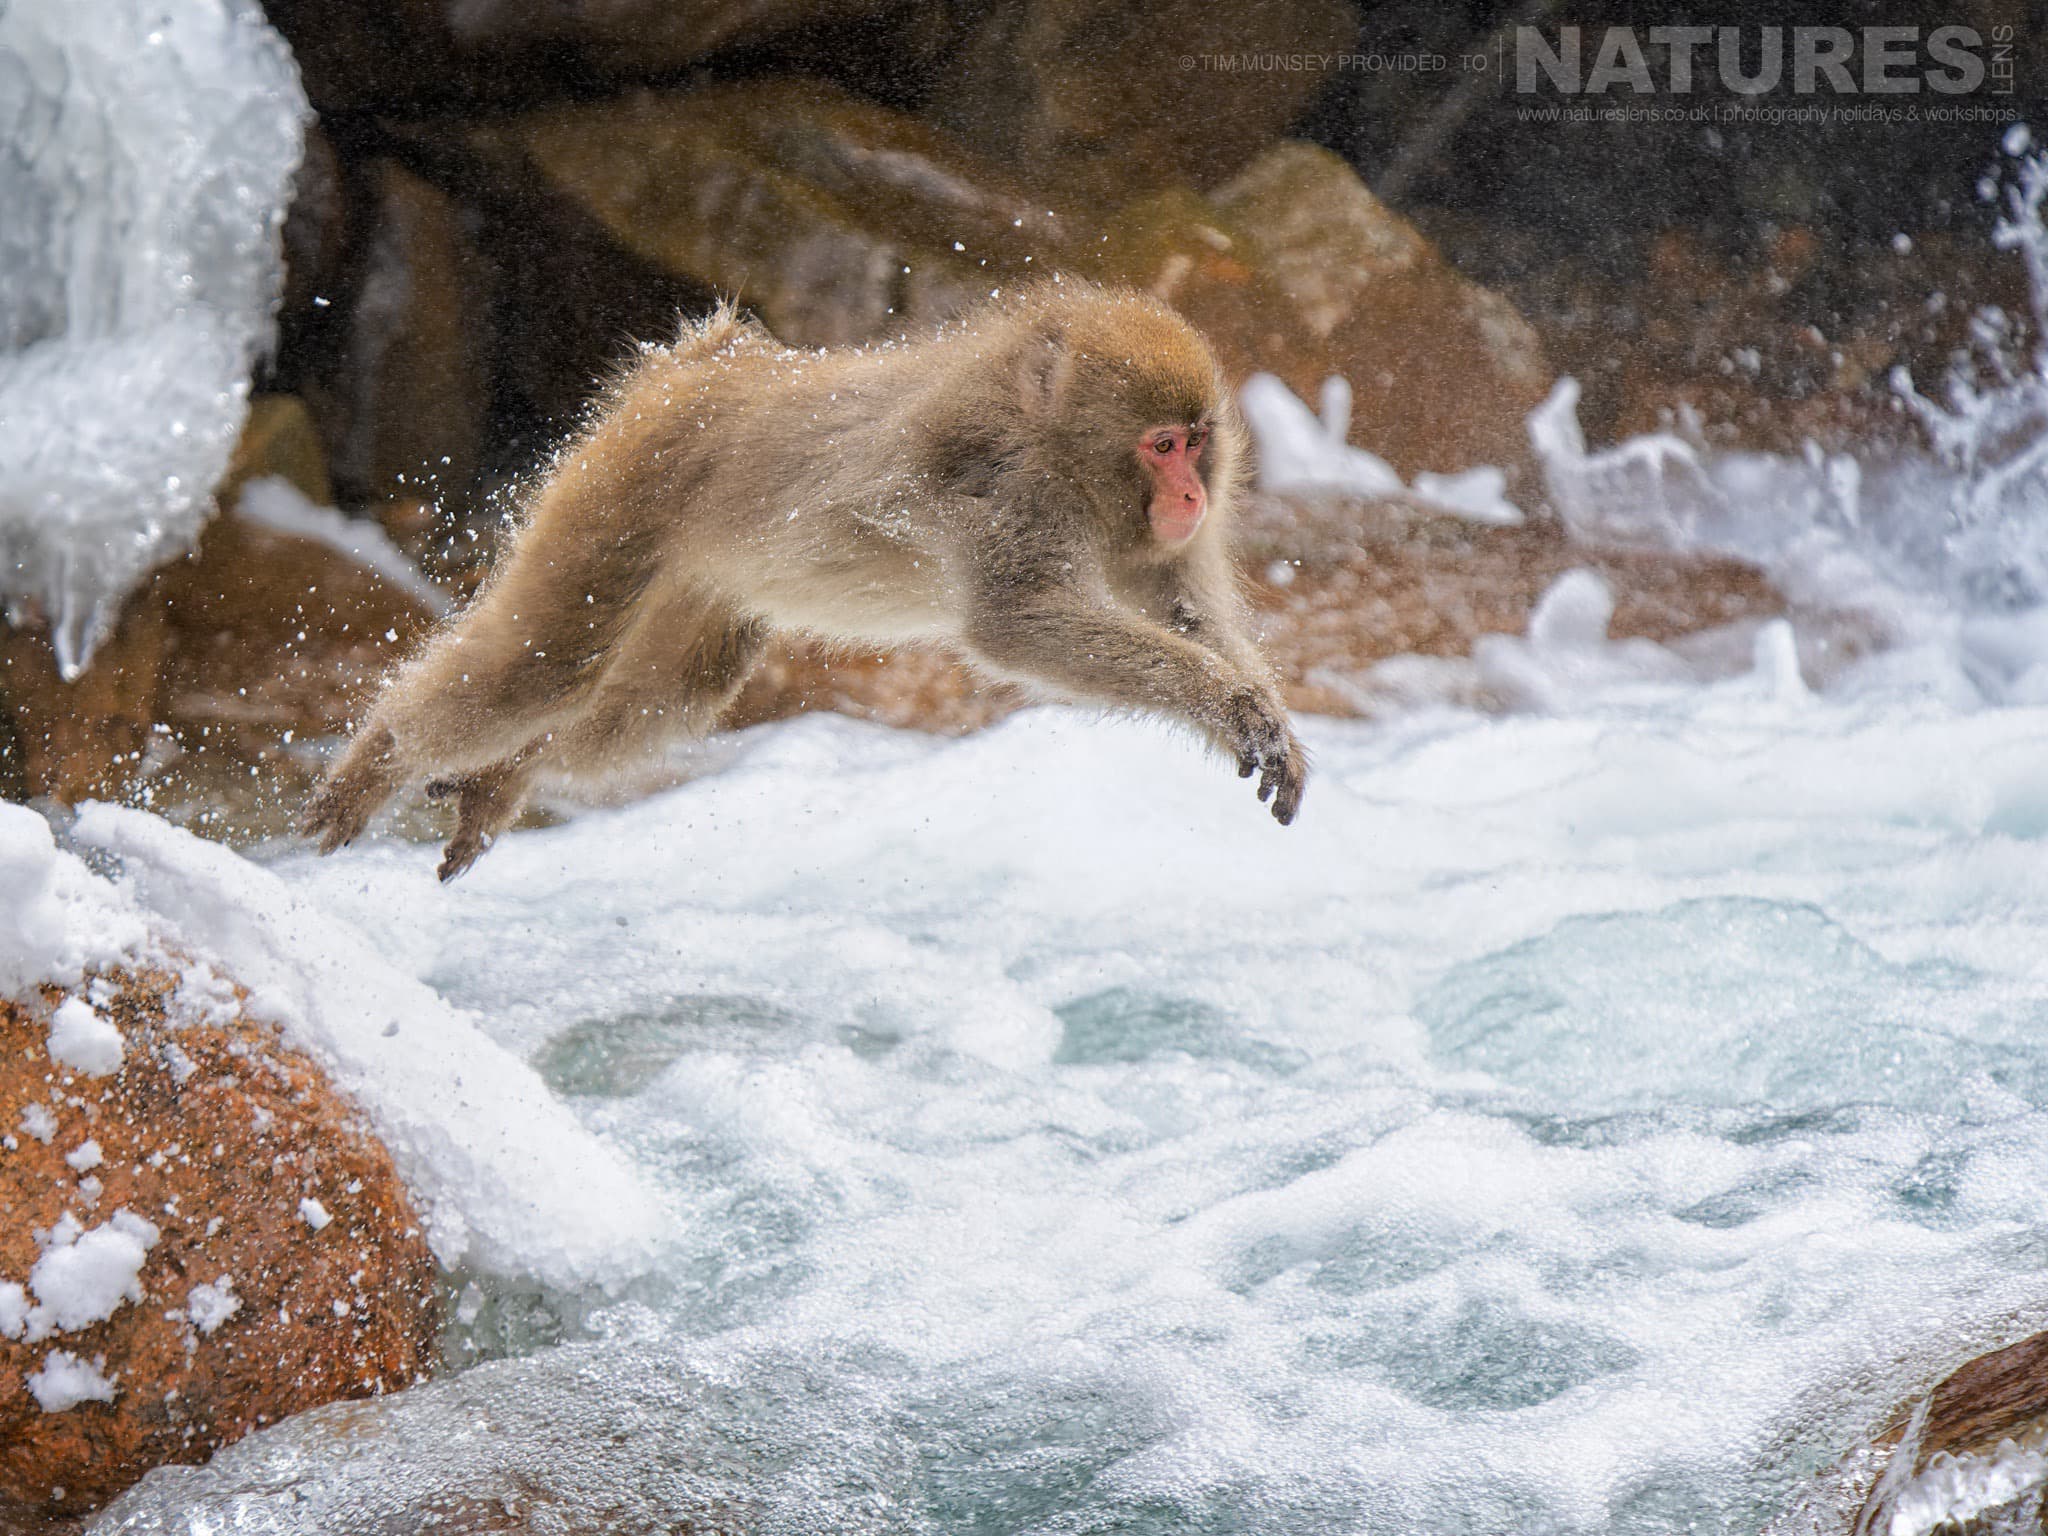 One Of The Snow Monkeys Or Japanese Macaques Of Jigokudani Snow Monkey Park Leaps Across A Stream One Of The Species Featured During Our Japan's Winter Wildlife Photography Holiday